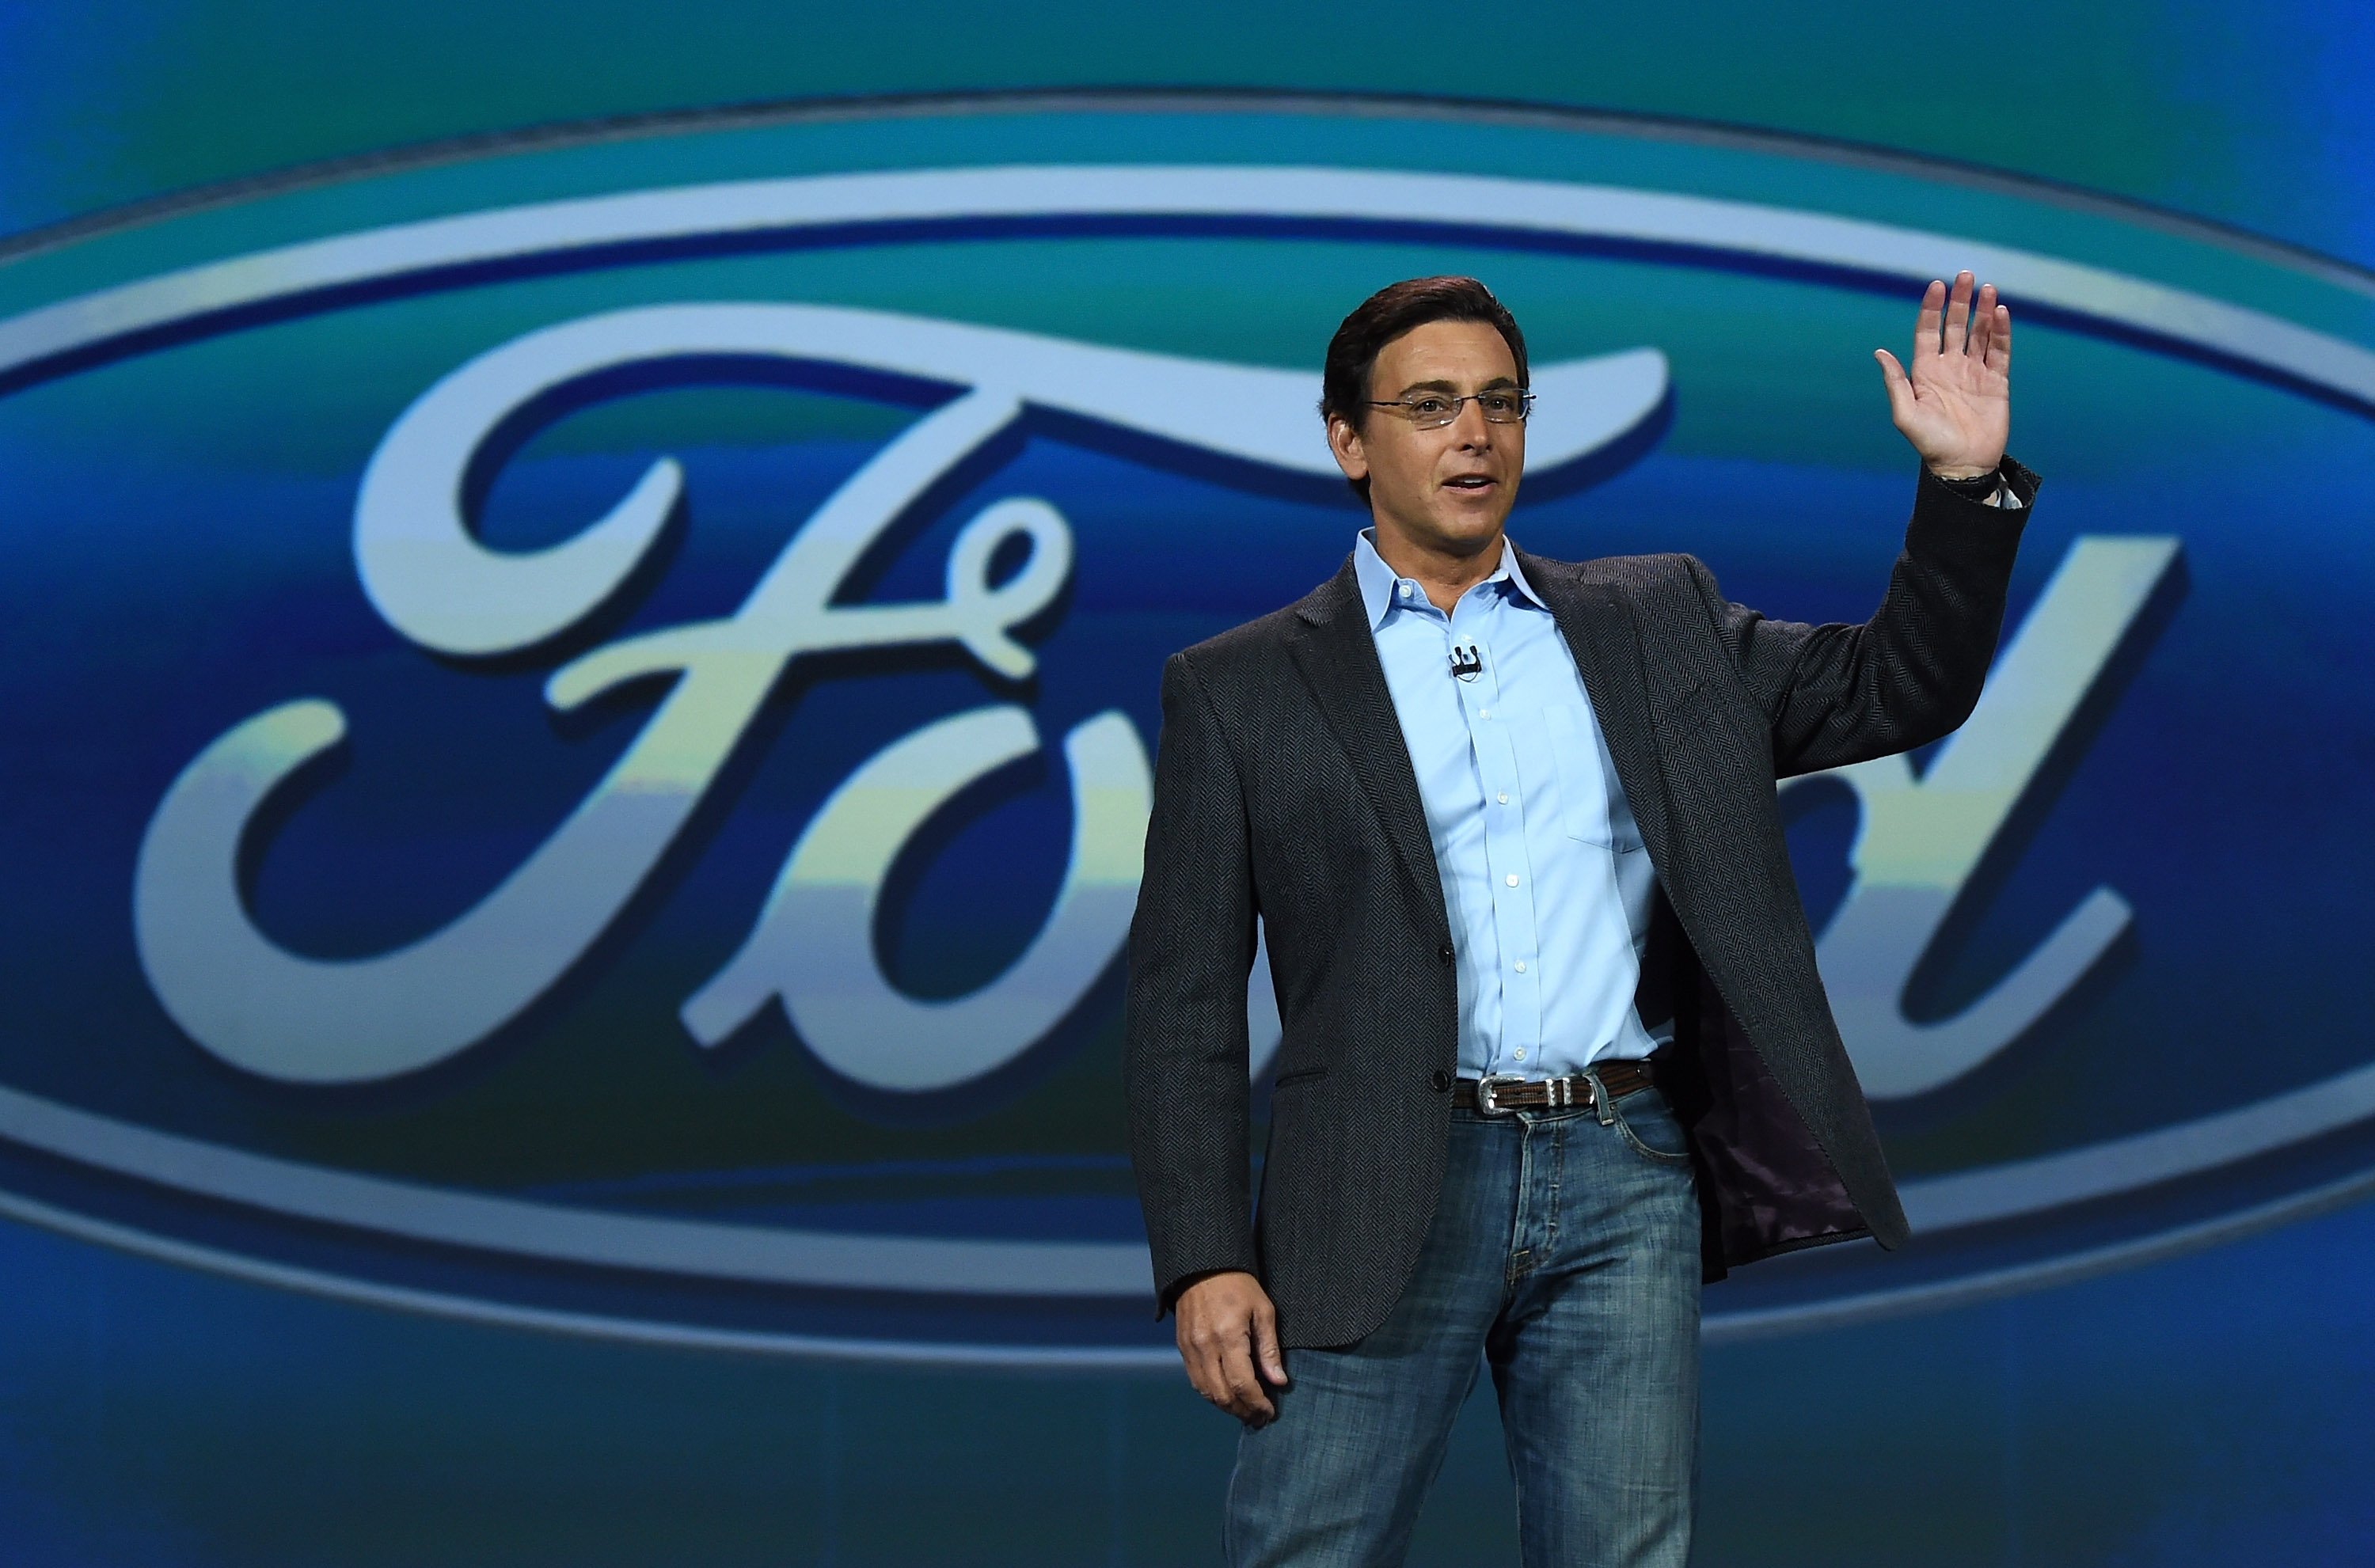 President and CEO of Ford Motor Co. Mark Fields delivers a keynote address at the 2015 International CES at The Venetian Las Vegas on Jan. 6, 2015 in Las Vegas, (Ethan Miller—Getty Images)